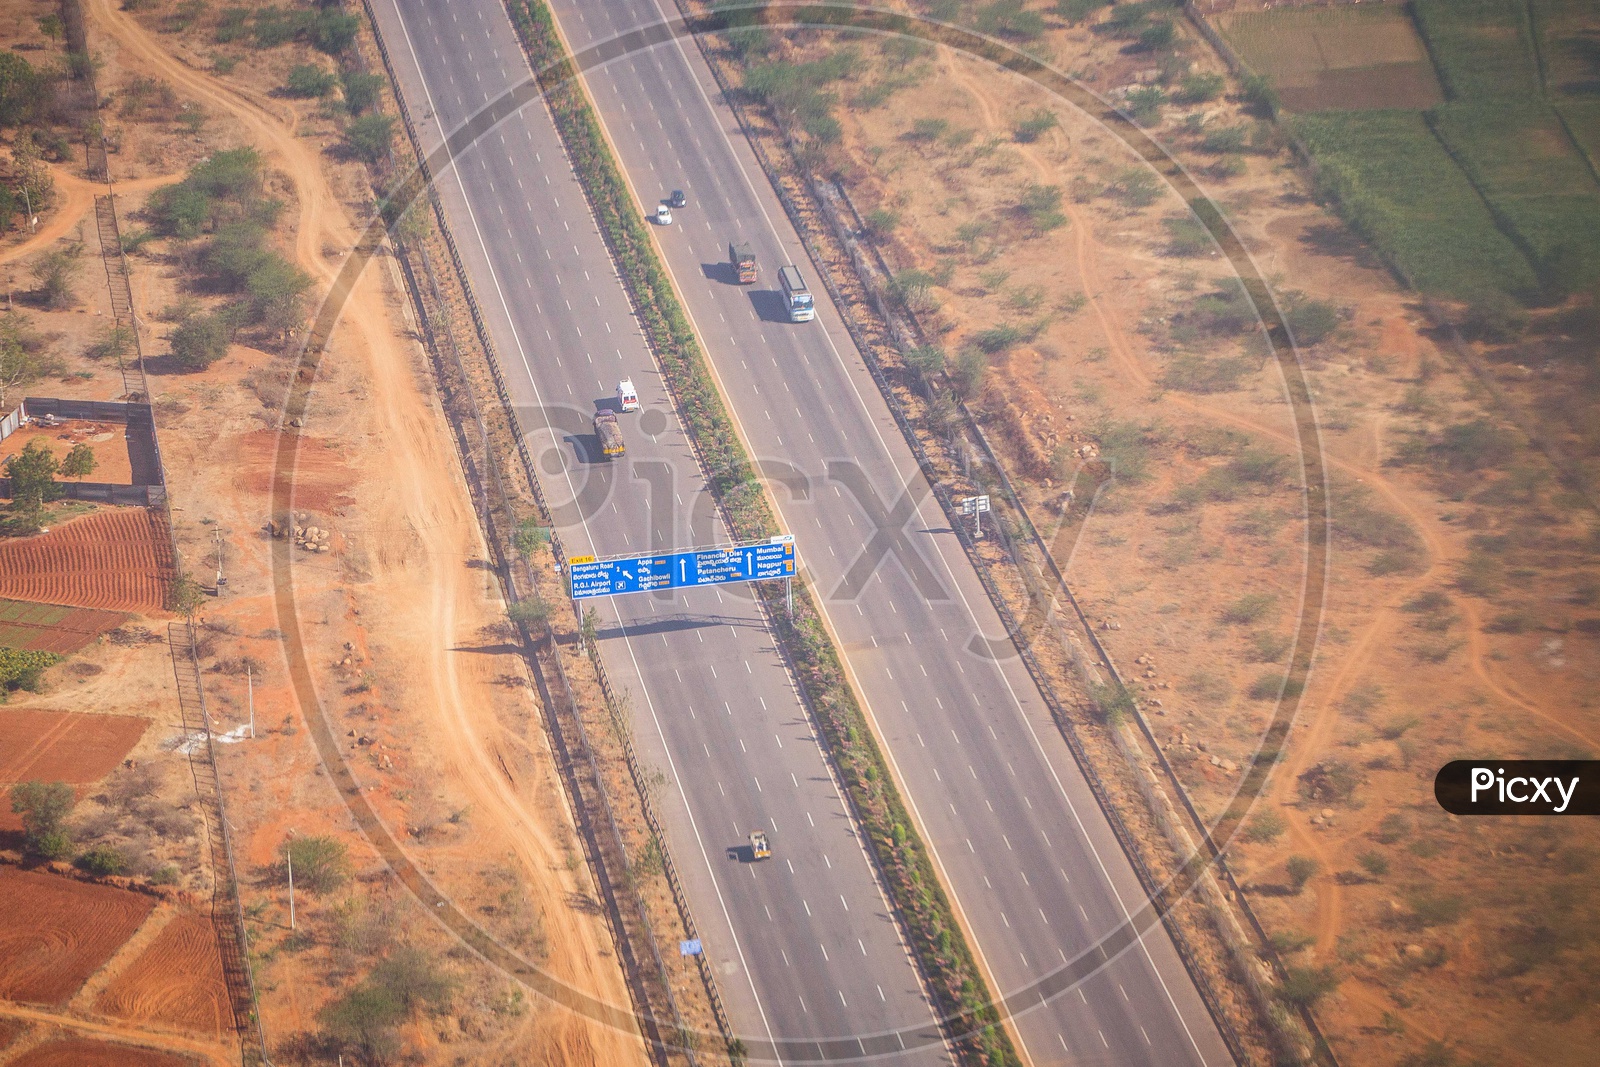 Aerial view of Highway or Expressway with Vehicles on Road